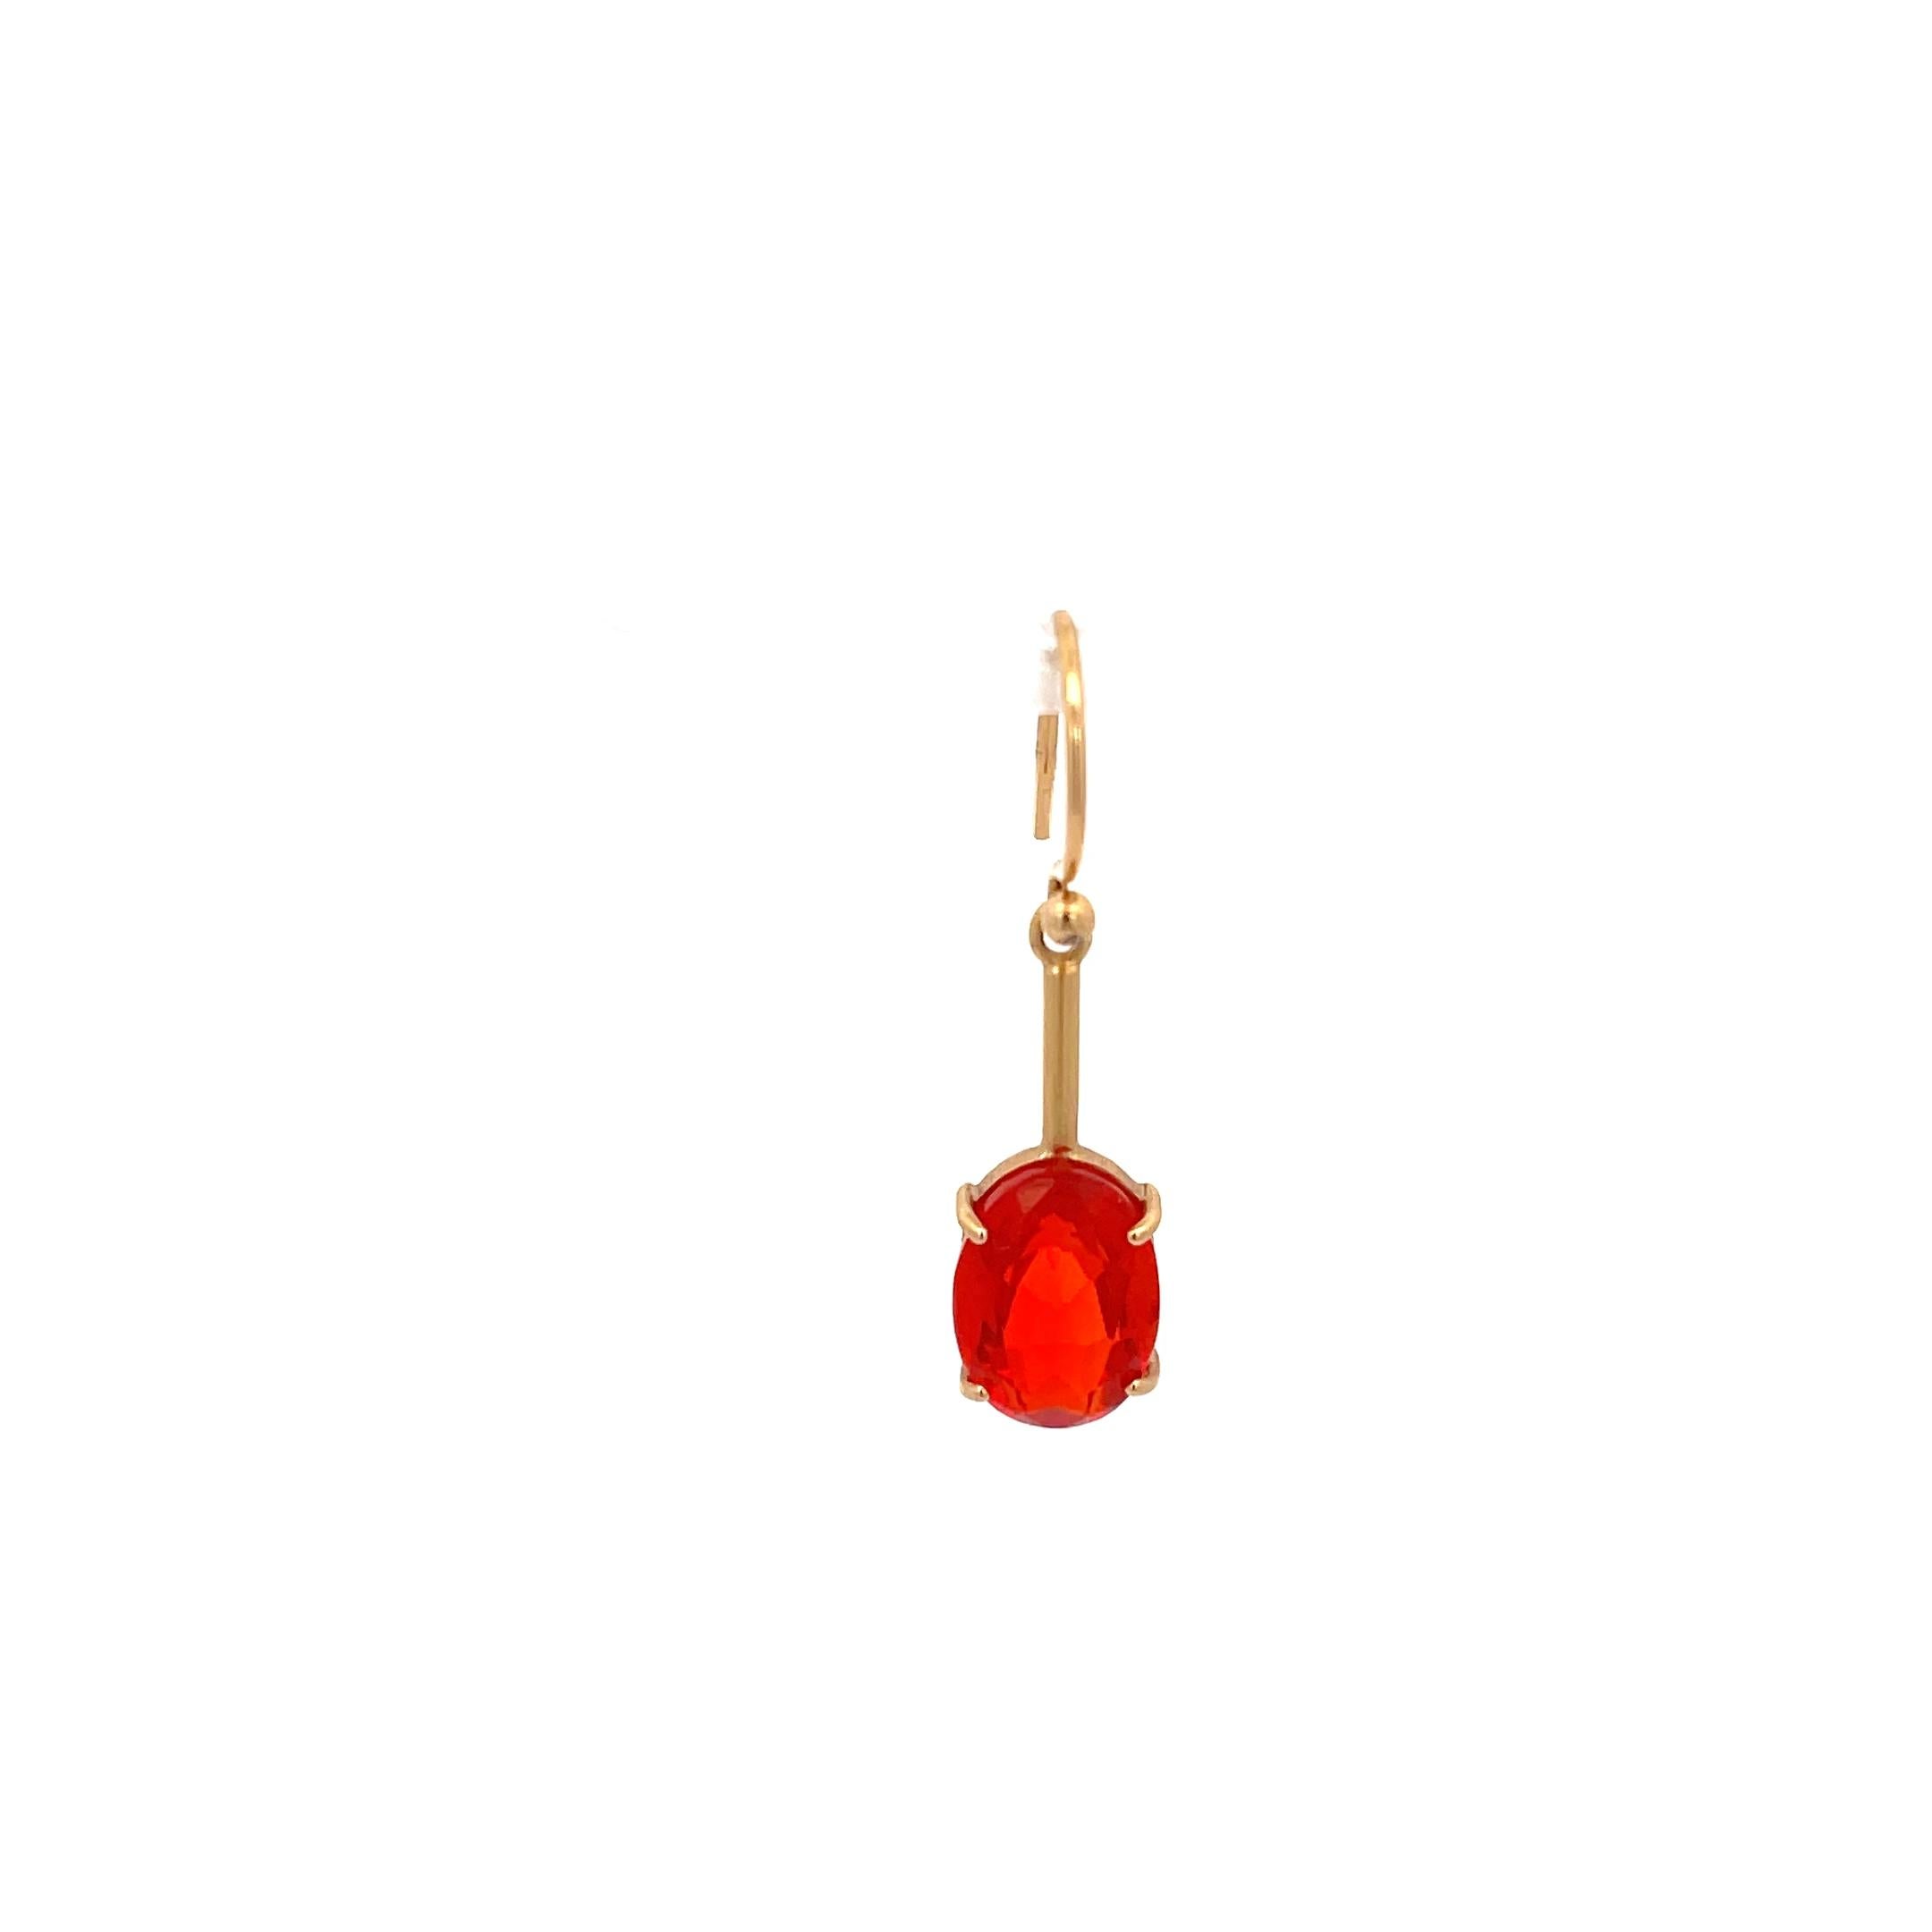 Contemporary Irene Neuwirth Fire Opal Single Earring 18K Rose Gold For Sale